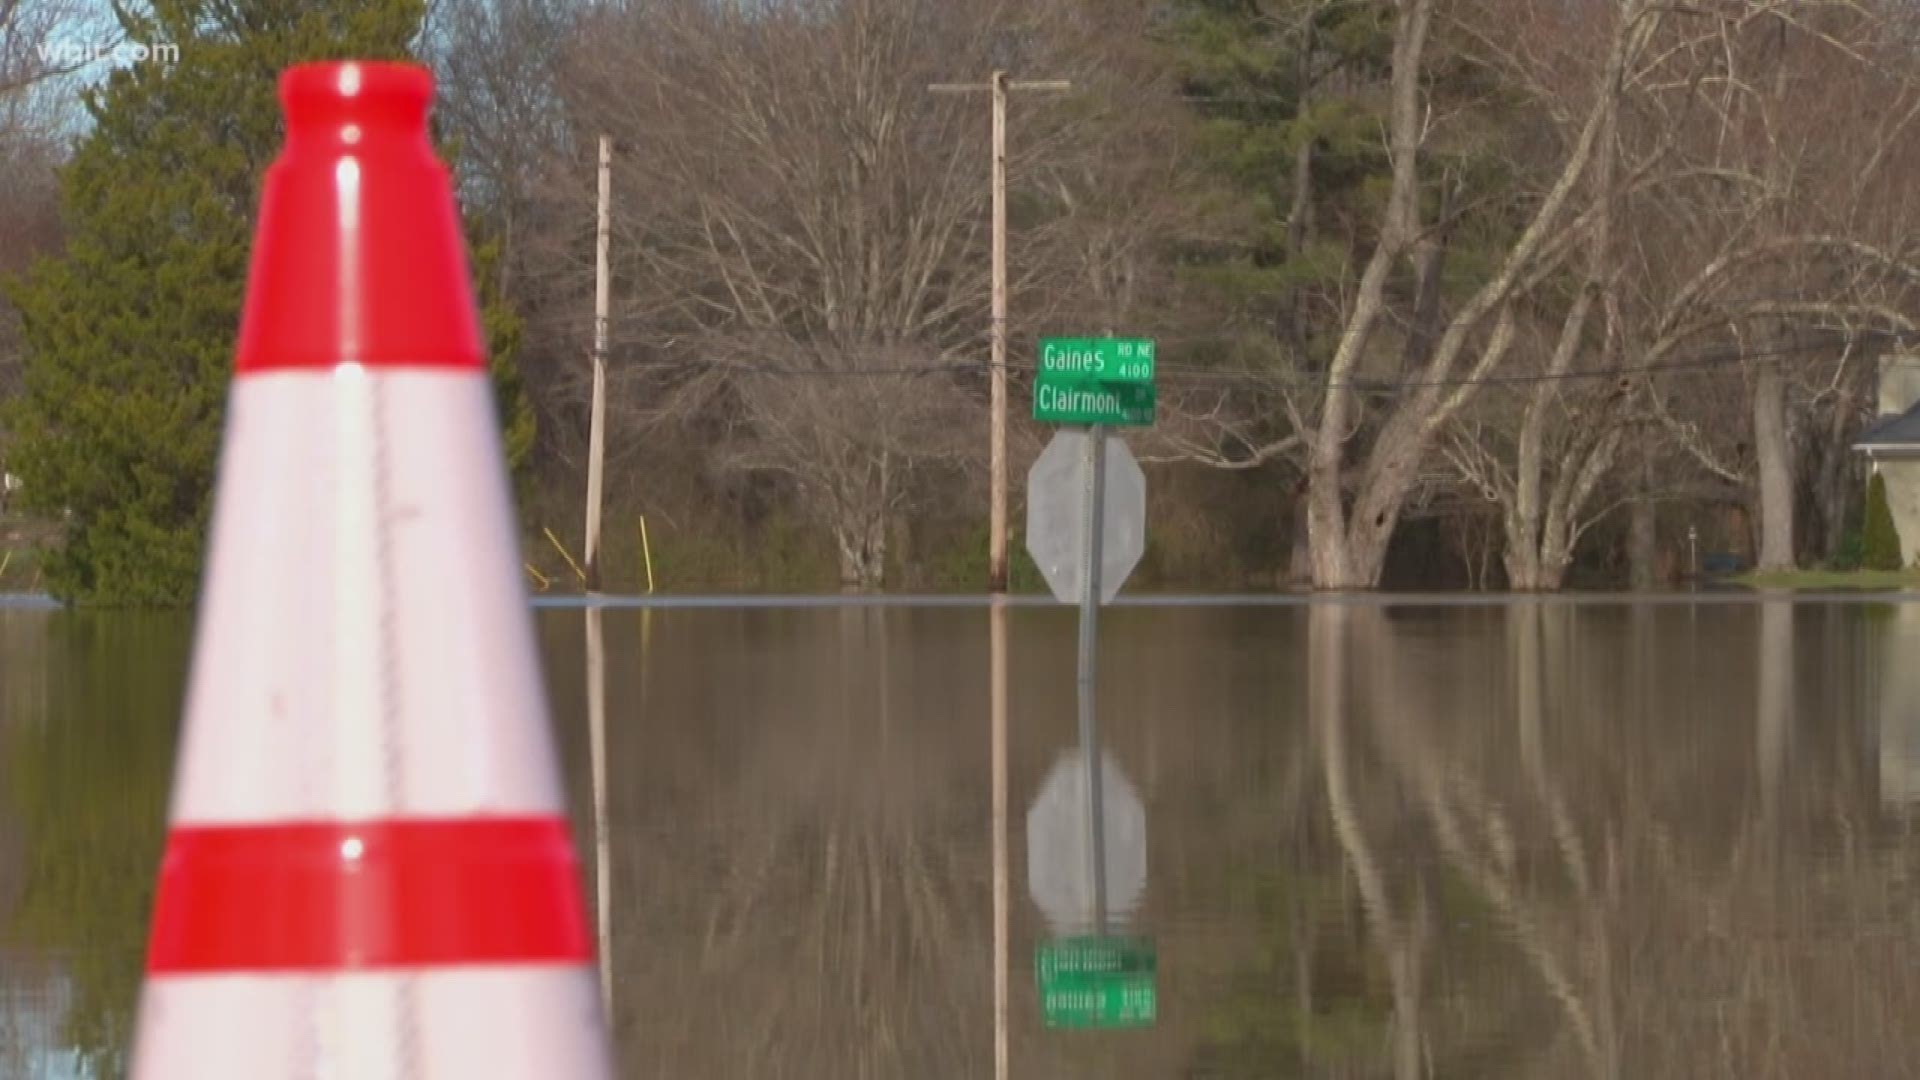 Knox County leaders say flooding has impacted more than 600 homes and 100 businesses throughout the county, and they expect those numbers to rise.